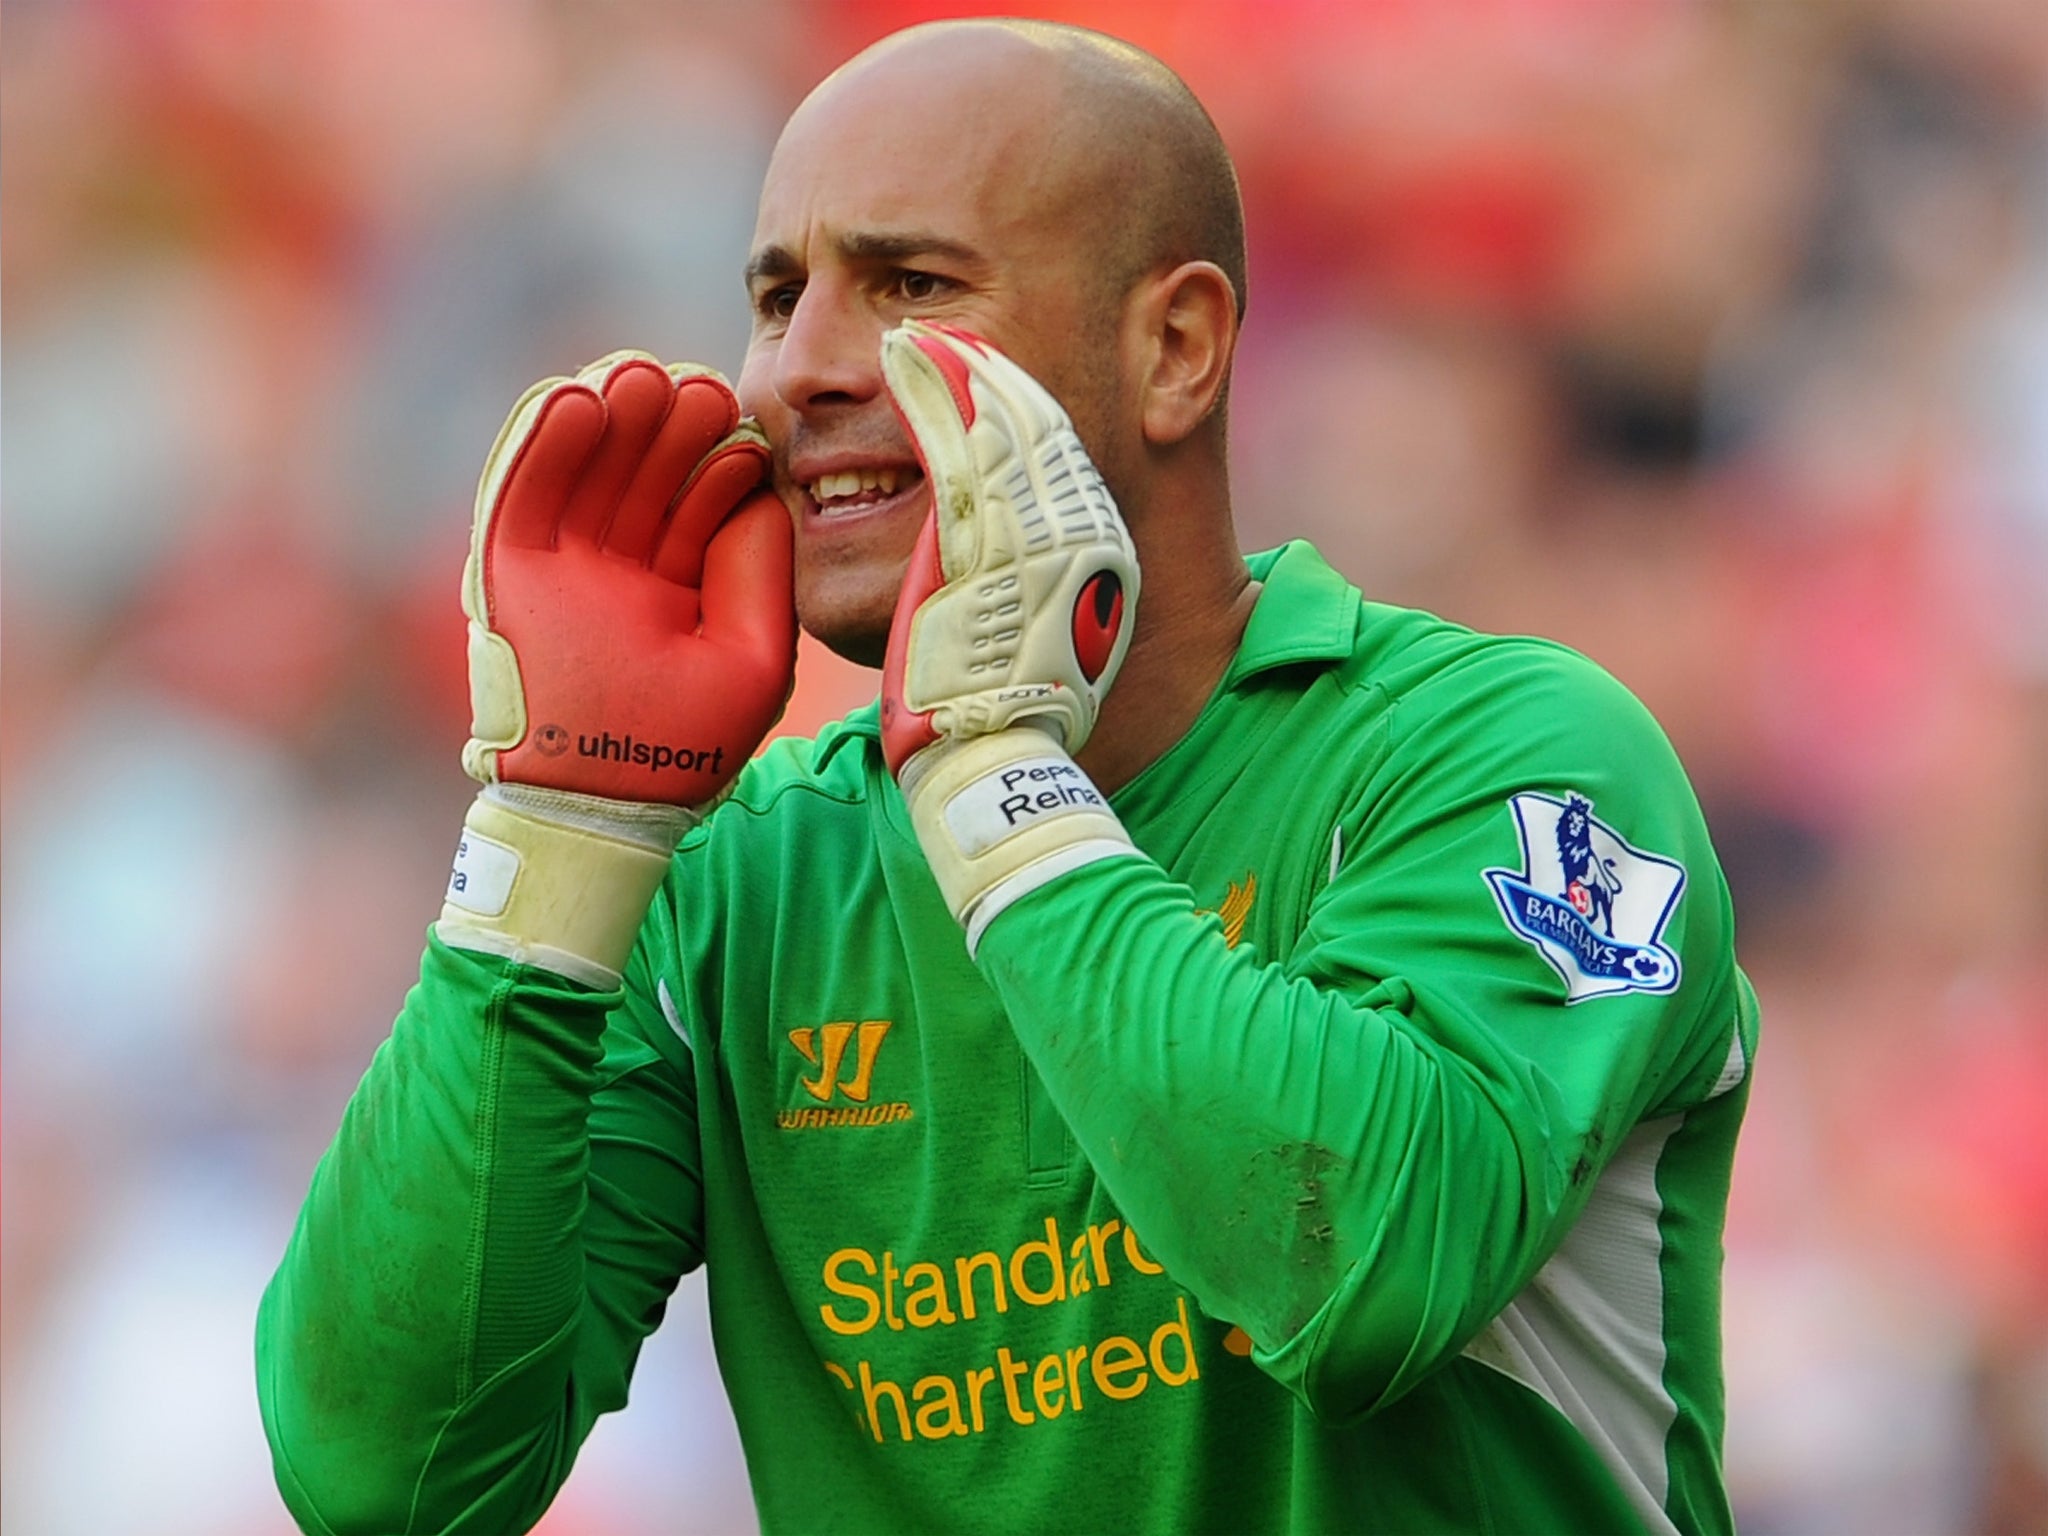 The fantasy life has to end at some point for the Liverpool goalkeeper Pepe Reina. In his case, it may be at Napoli